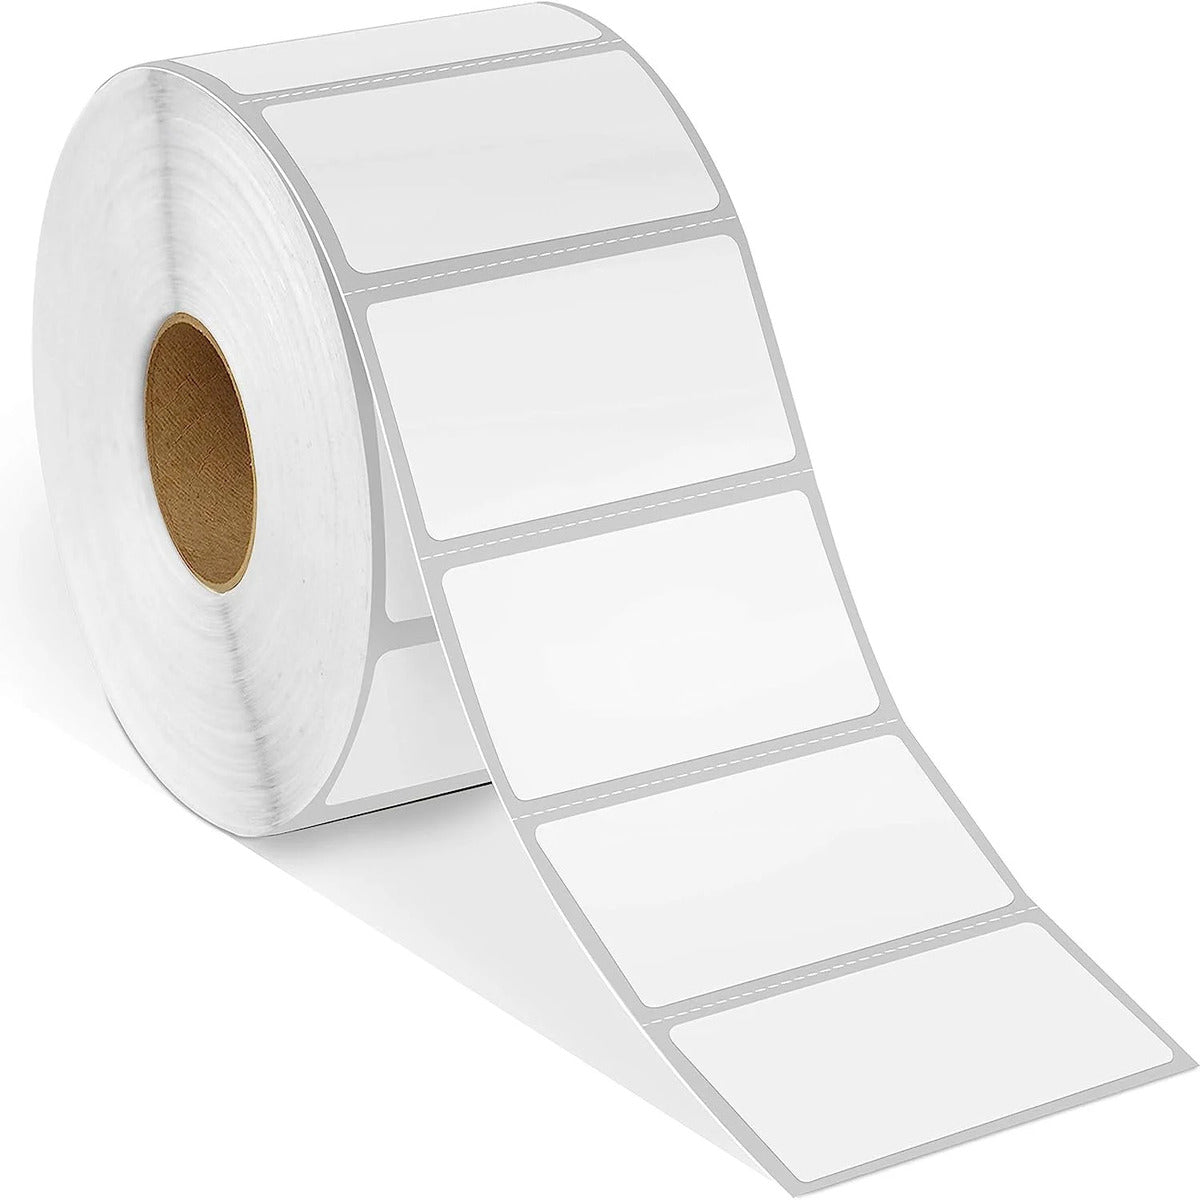 Thermal Labels Rolls 50 x 25mm (1 Roll = 2000 Individual Labels)